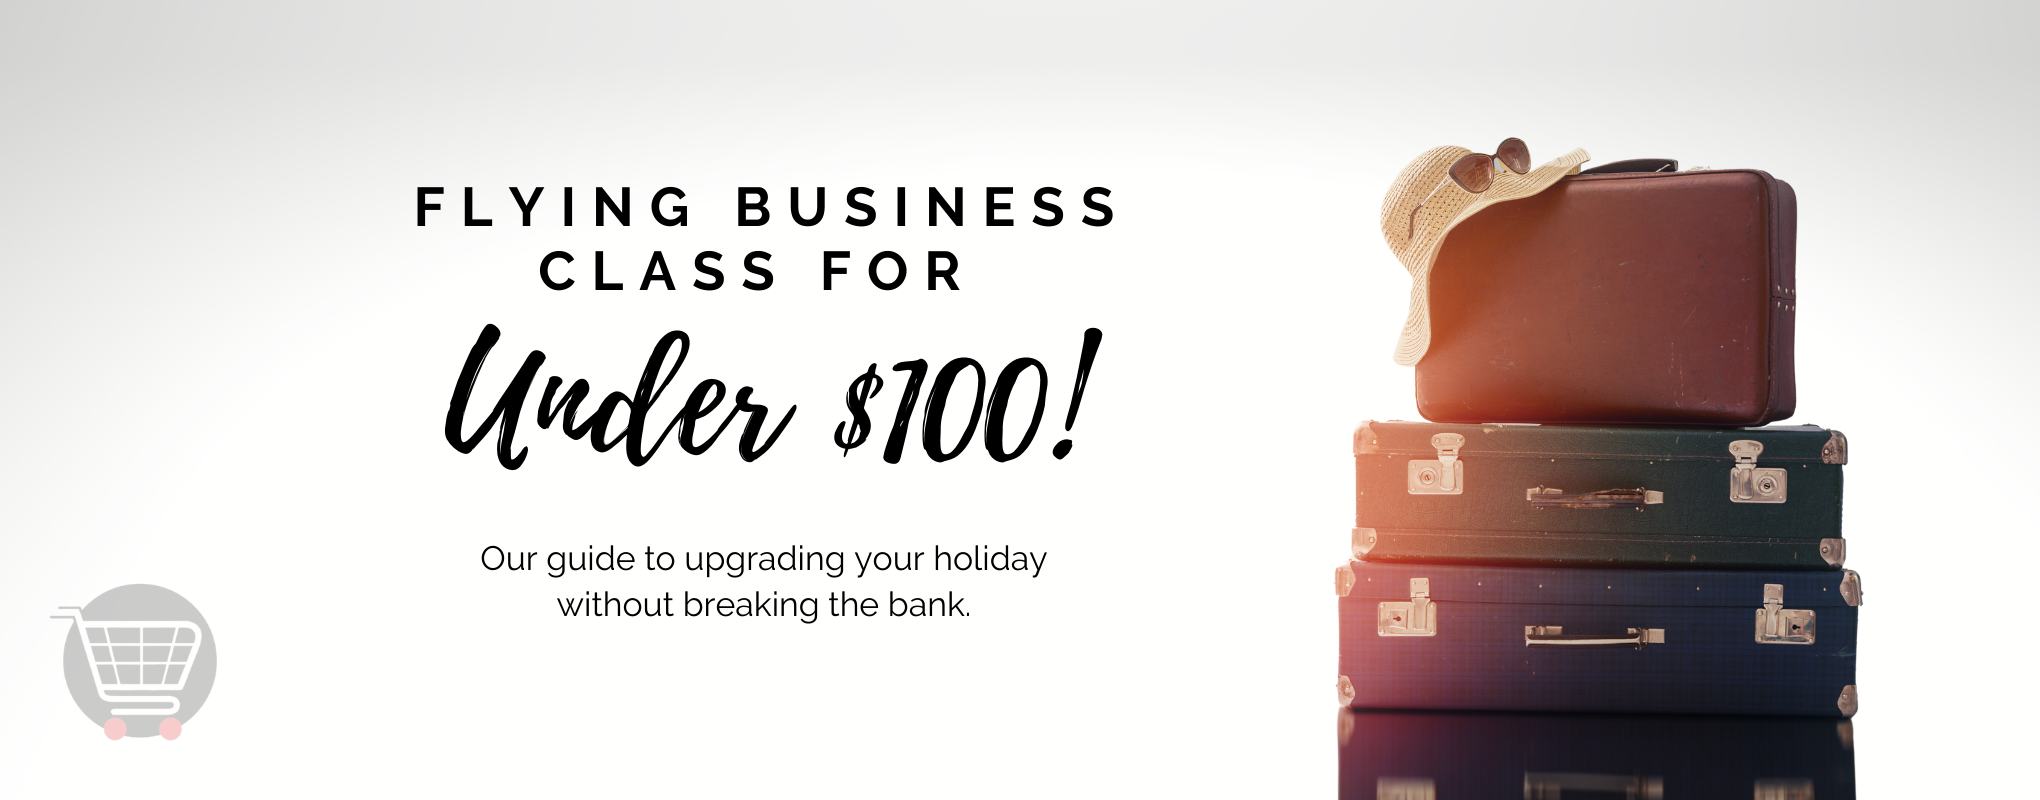 Flying Business Class for under $100!